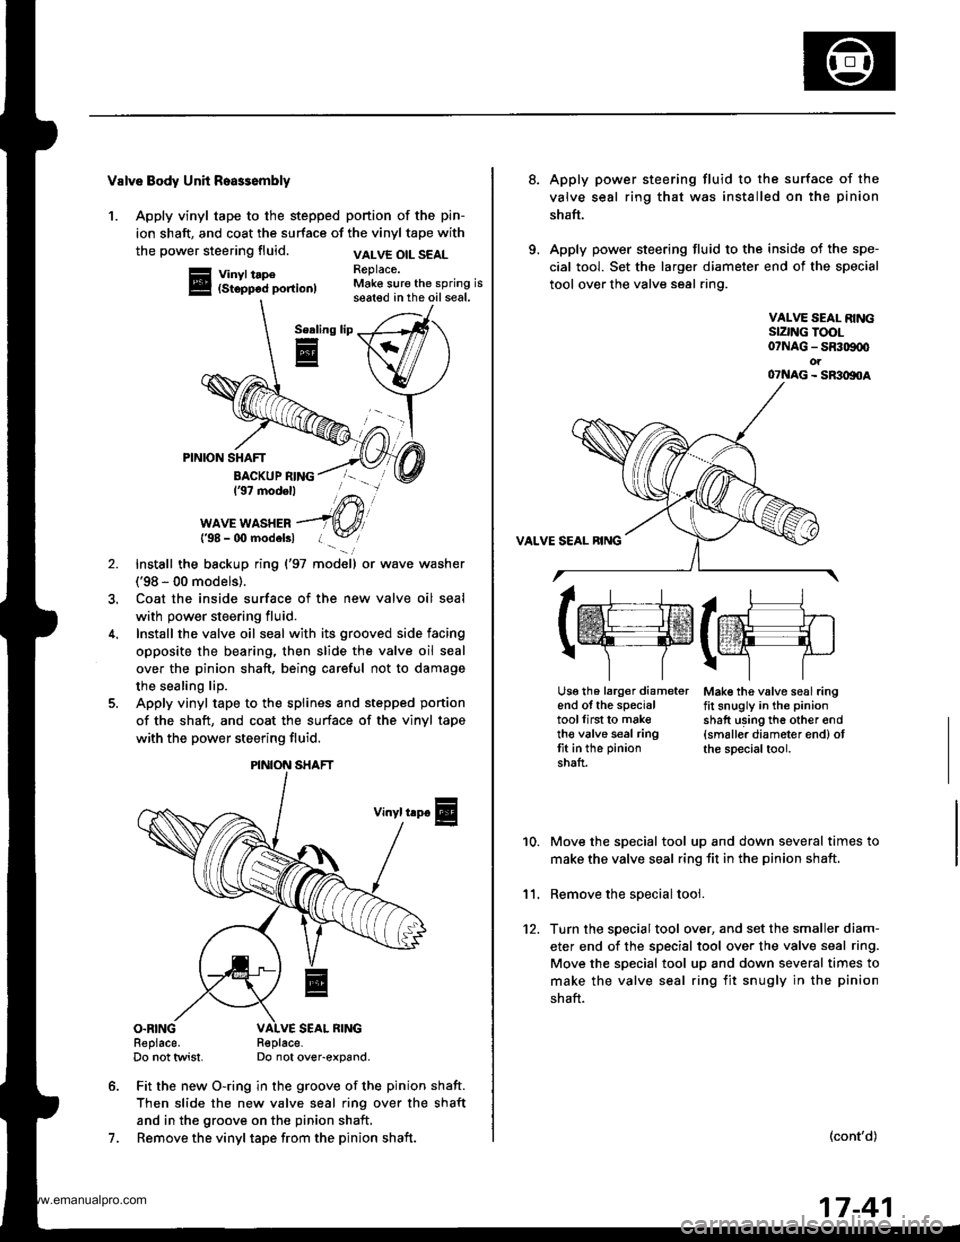 HONDA CR-V 1997 RD1-RD3 / 1.G User Guide 
Valve Body Unh Roa$embly
1. Apply vinyl tape to the stepped portion of the pin-
ion shaft, and coat the surface of the vinyl tape with
the power steering fluid.
Vinyl tape(Stopp6d portion)
VALVE OIL 